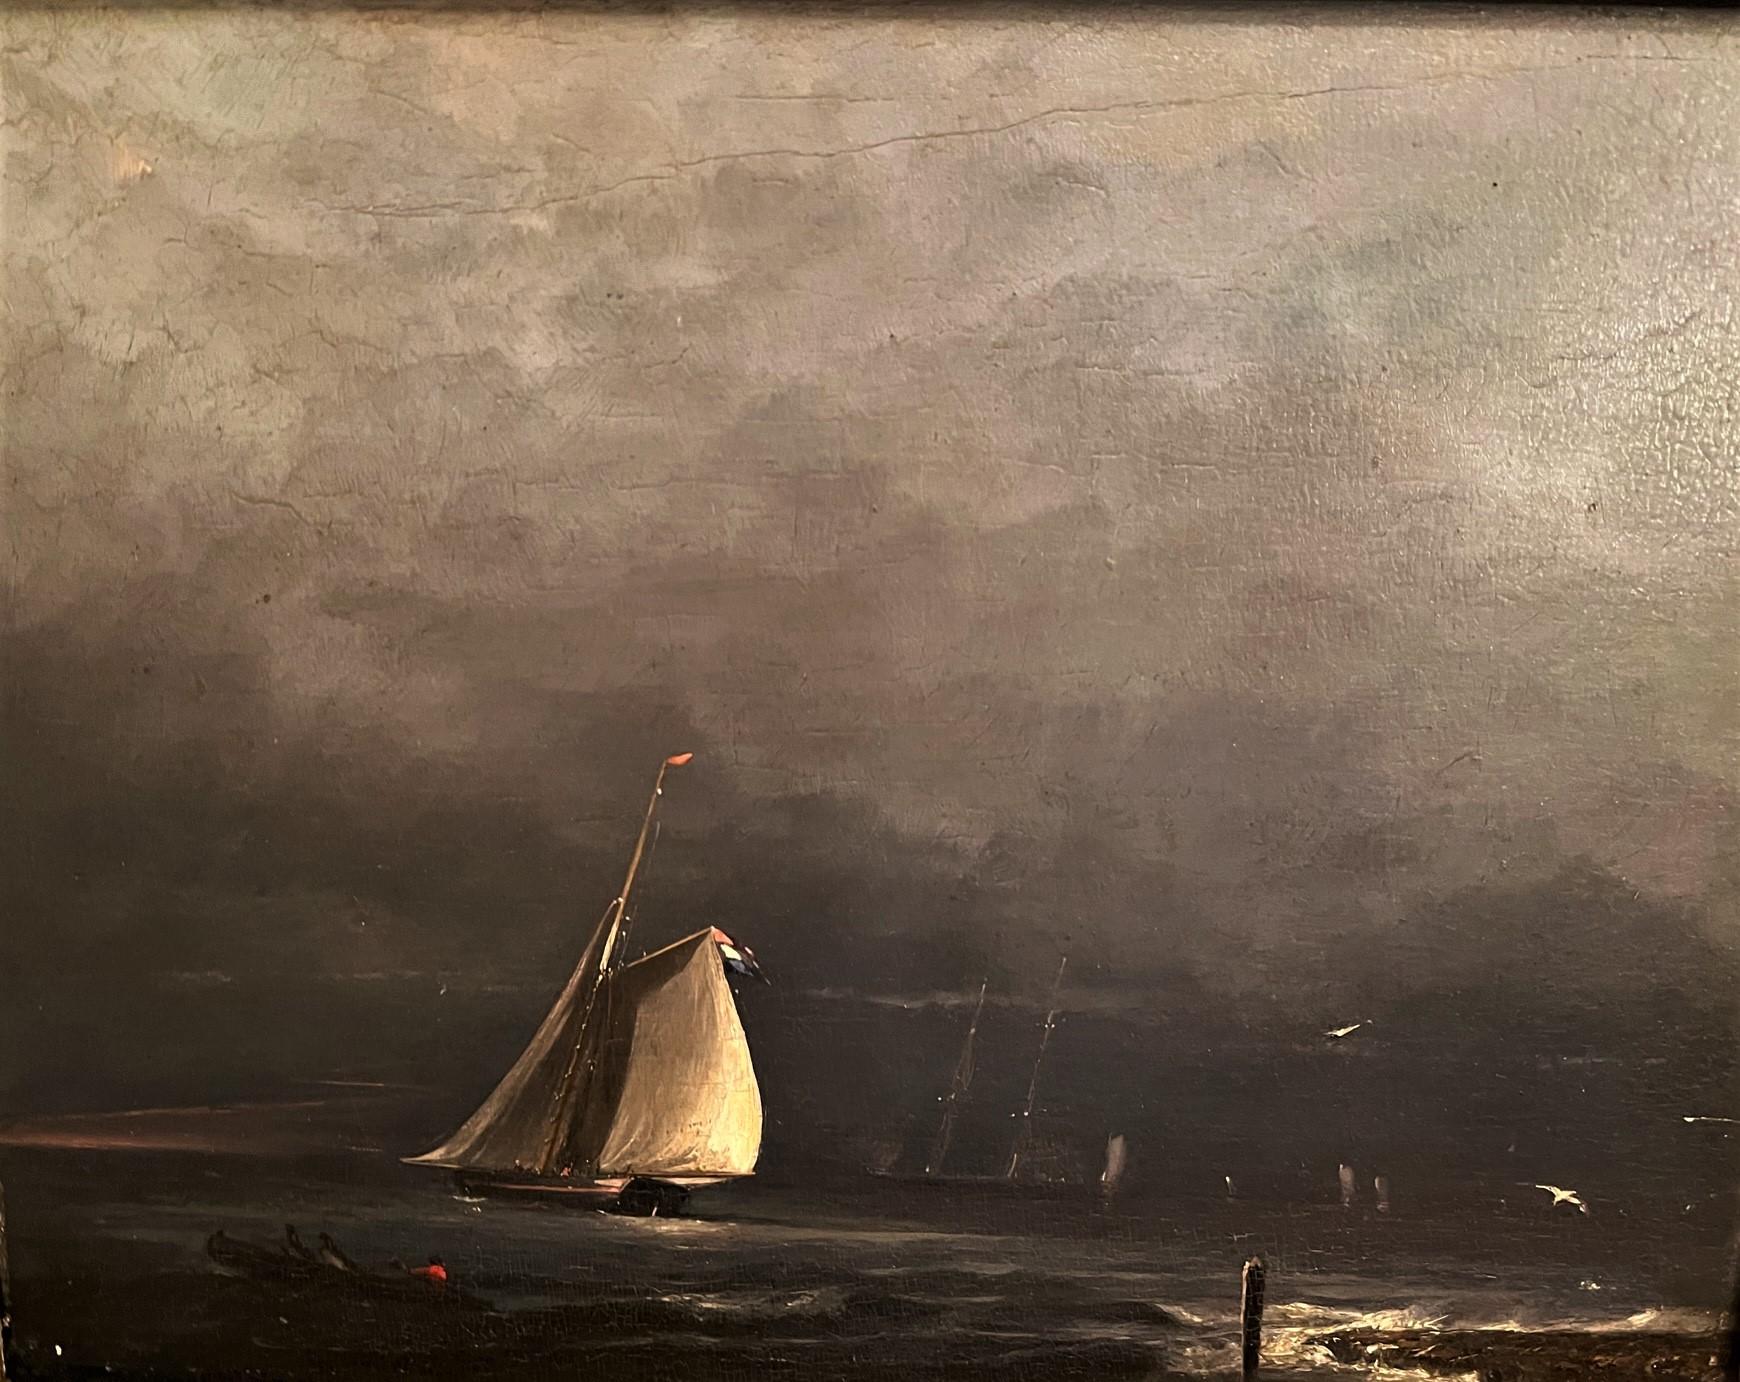 This eye-catching marine painting depicts a sailboat in a stormy sea, probably during a race off the coast of Brittany or Normandy. The dark, menacing sky is beautifully painted as is the boat itself. The small rowboat in the foreground appears to